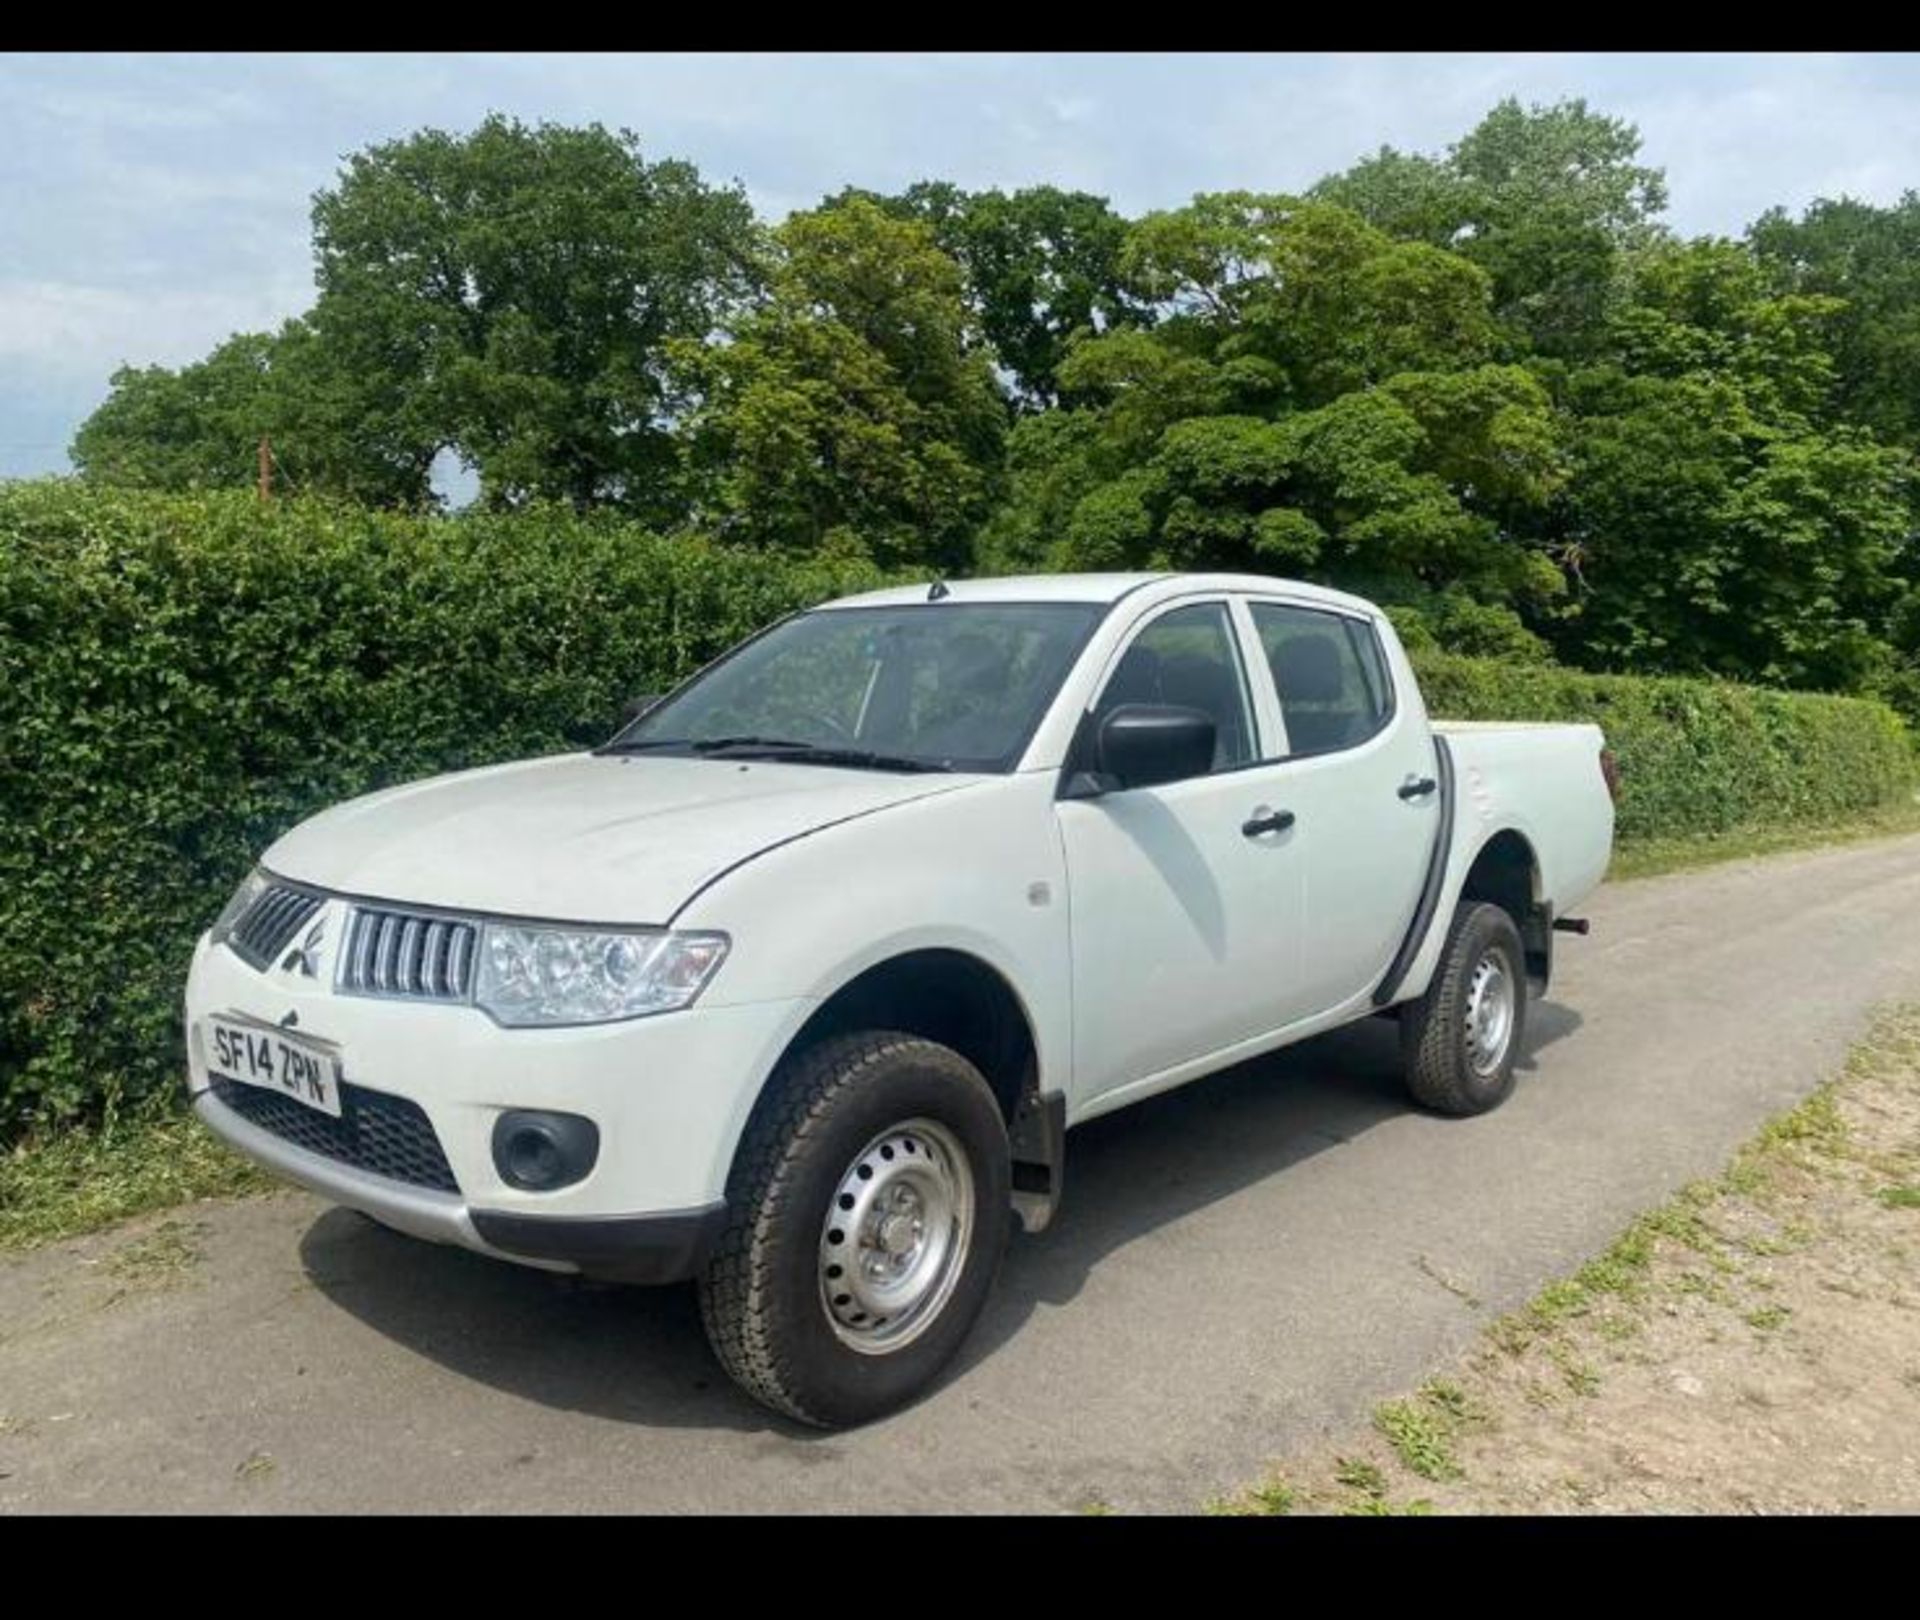 2014 MITSUBISHI L200 4 WORK 4X4 PICK UP COUNCIL DIRECT LOCATION NORTH YORKSHIRE. - Image 6 of 7